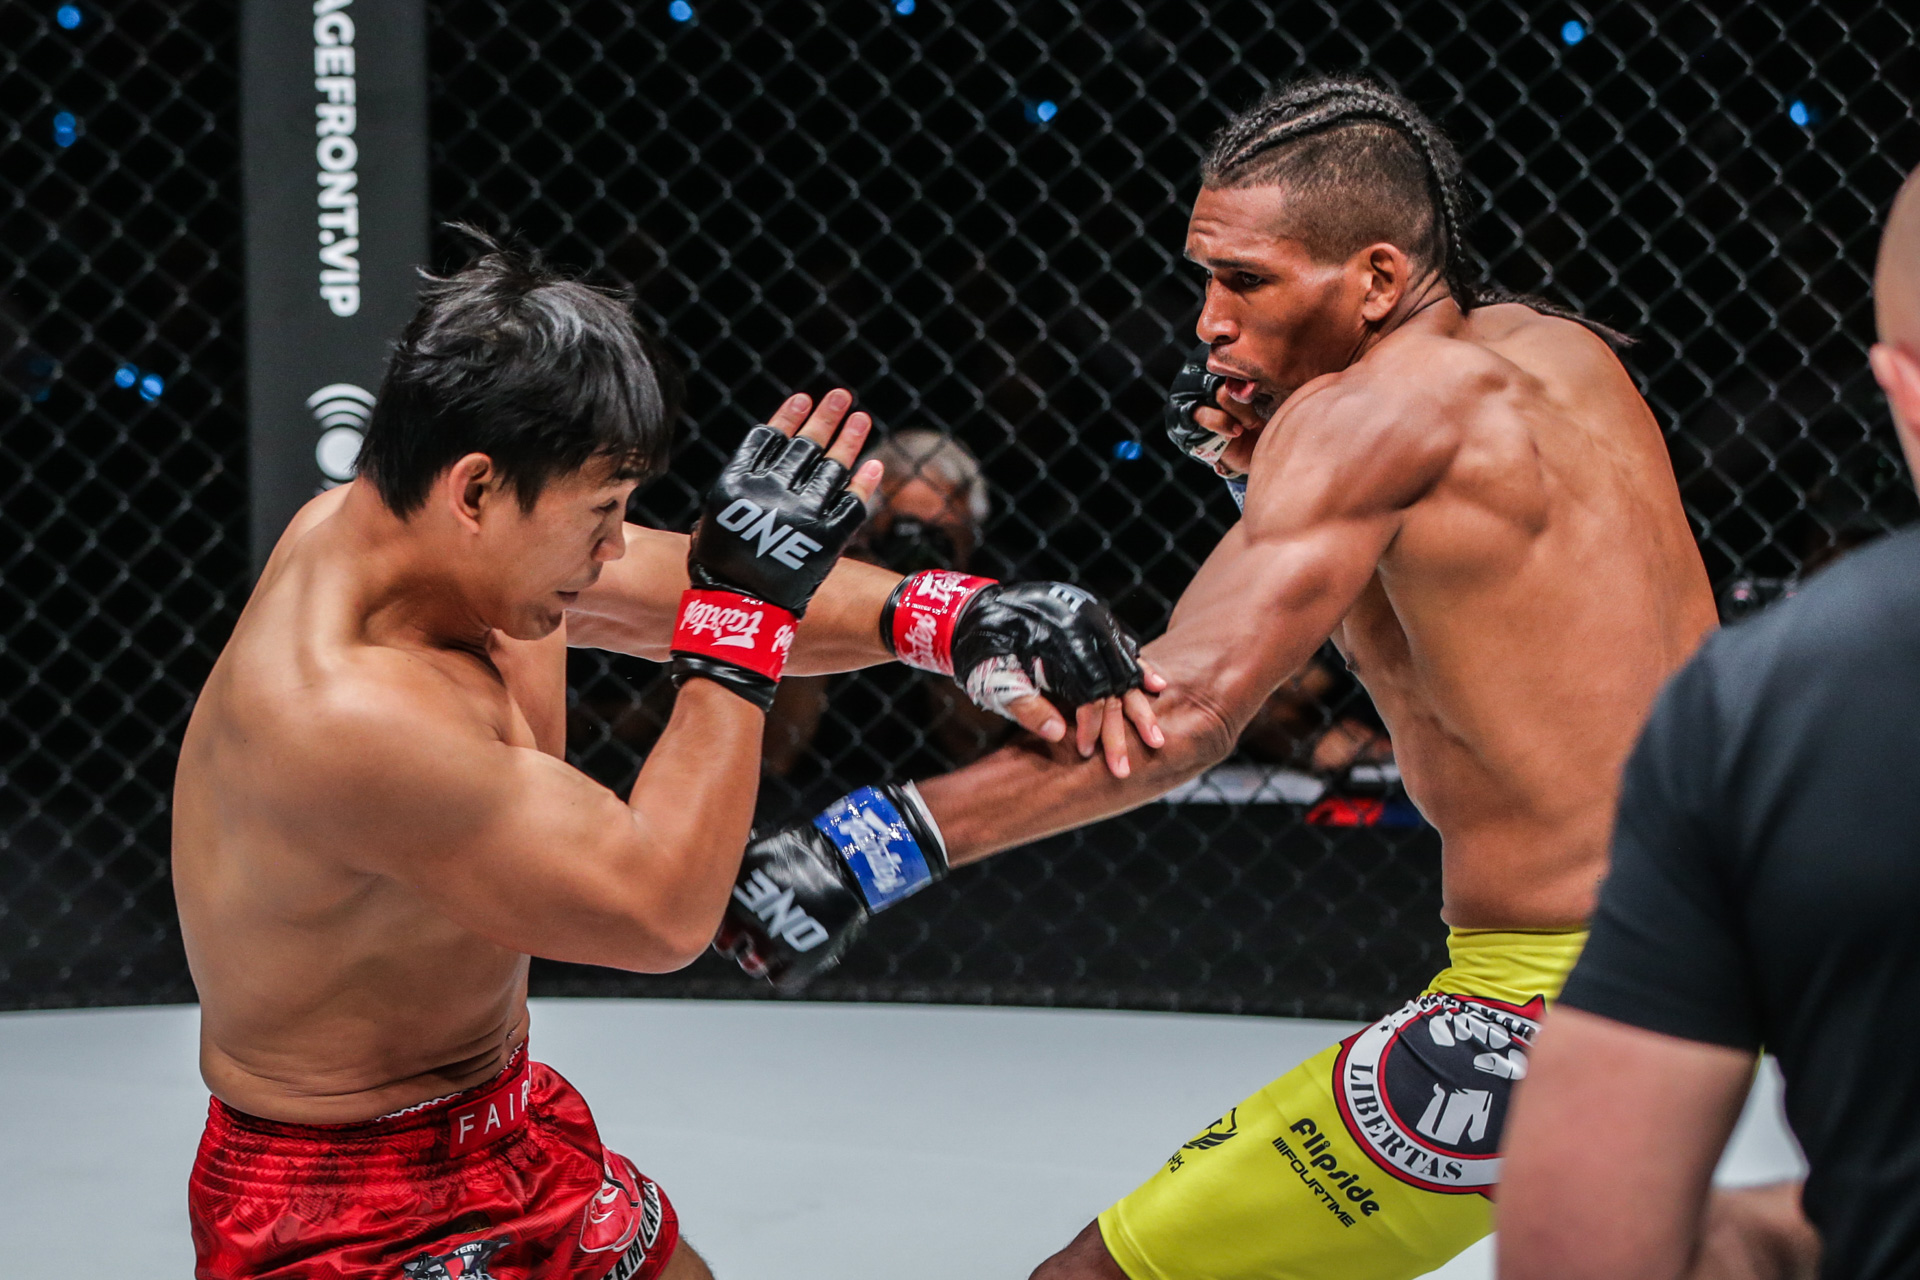 ONE-Fight-Night-5-Edson-Marques-def-Eduard-Folayang Shinya Aoki yearns for one more match with Eduard Folayang in the Philippines Mixed Martial Arts News ONE Championship  - philippine sports news